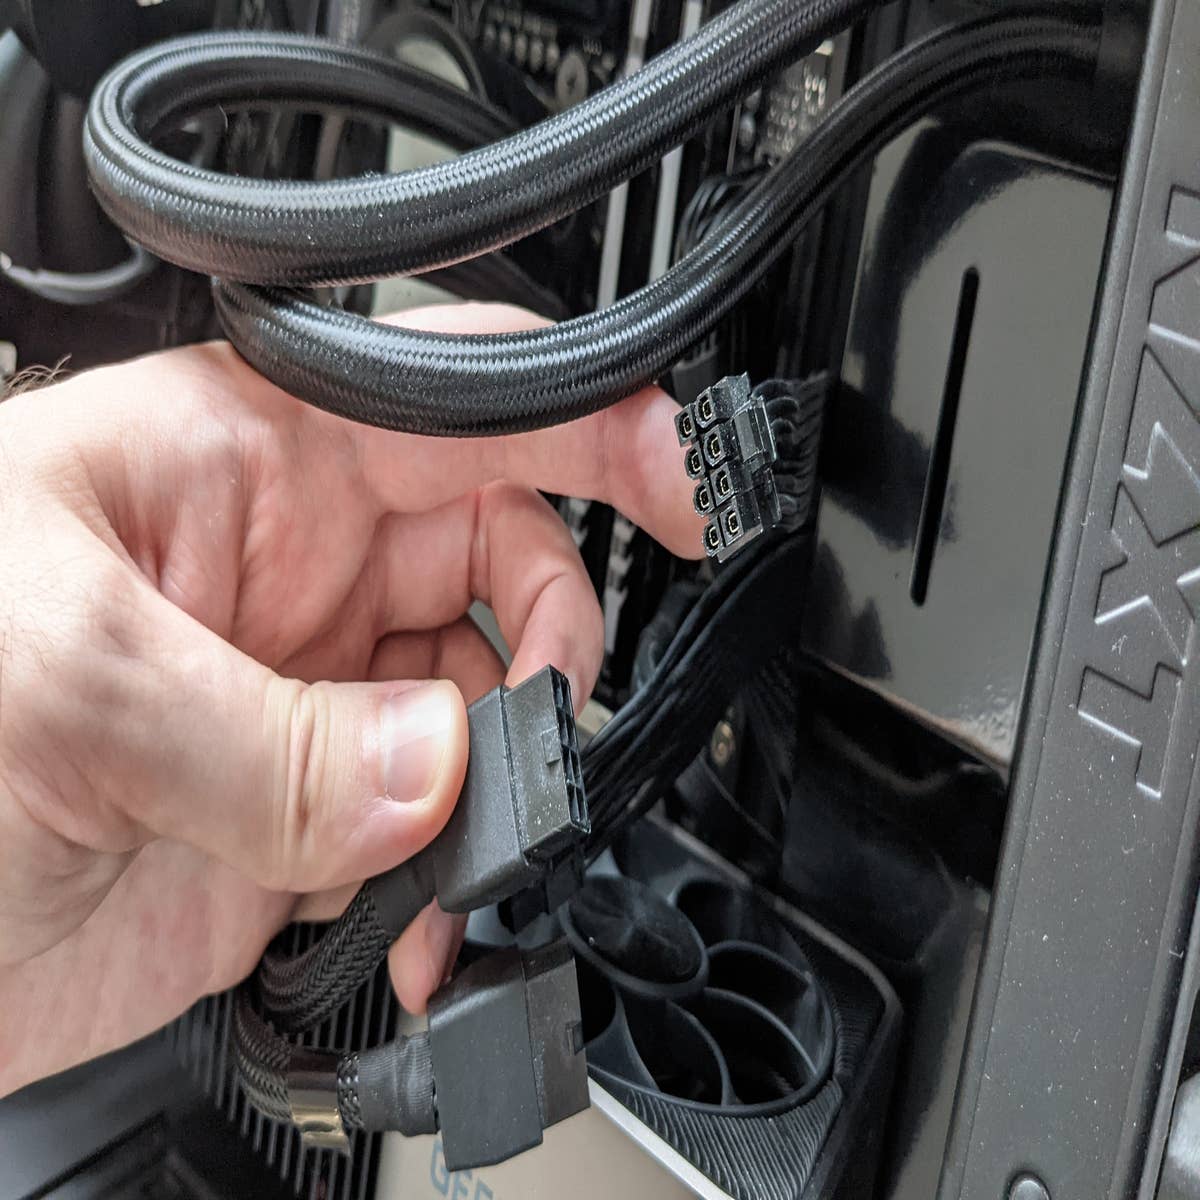 How to tidy cables, reassemble your PC case and connect peripherals